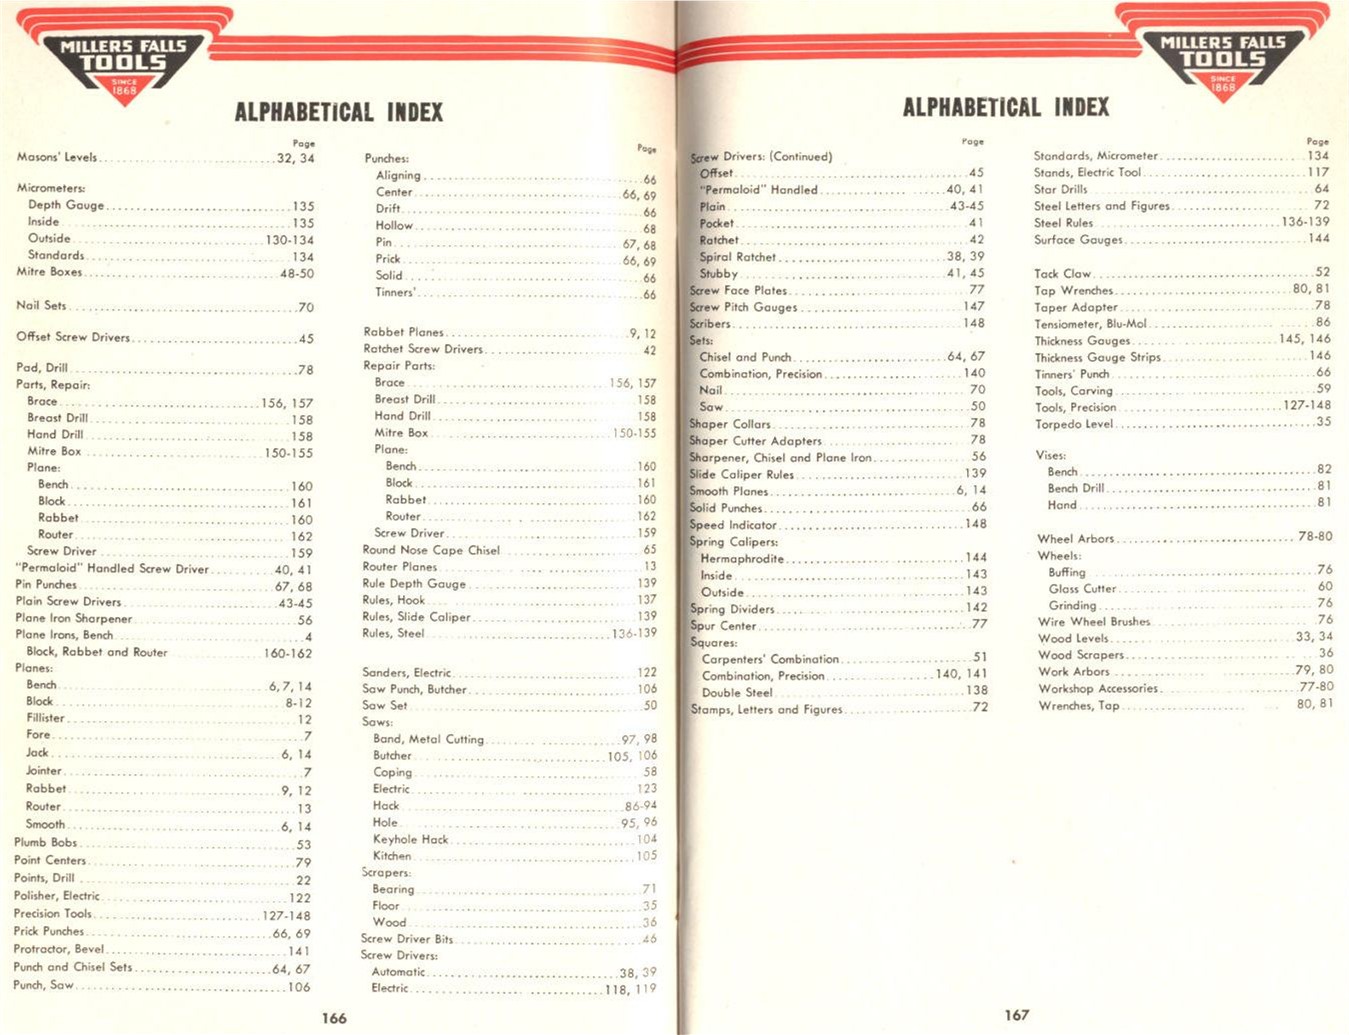 Millers Falls Index for # 49 Catalog